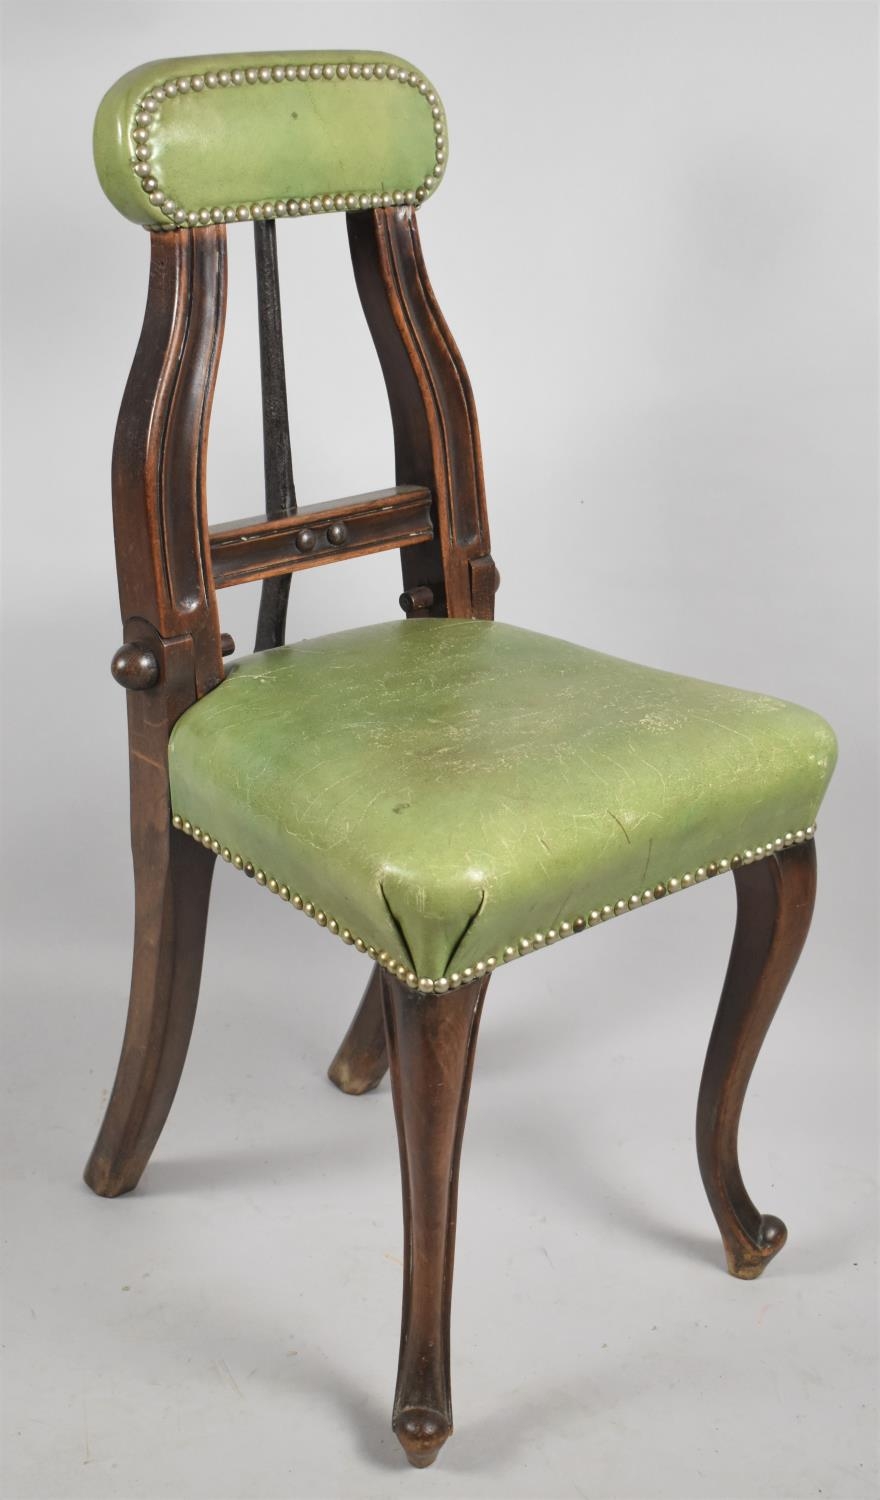 An Unusual 19th Century Leather Upholstered Chair with Winding Adjustment to back, Perhaps for